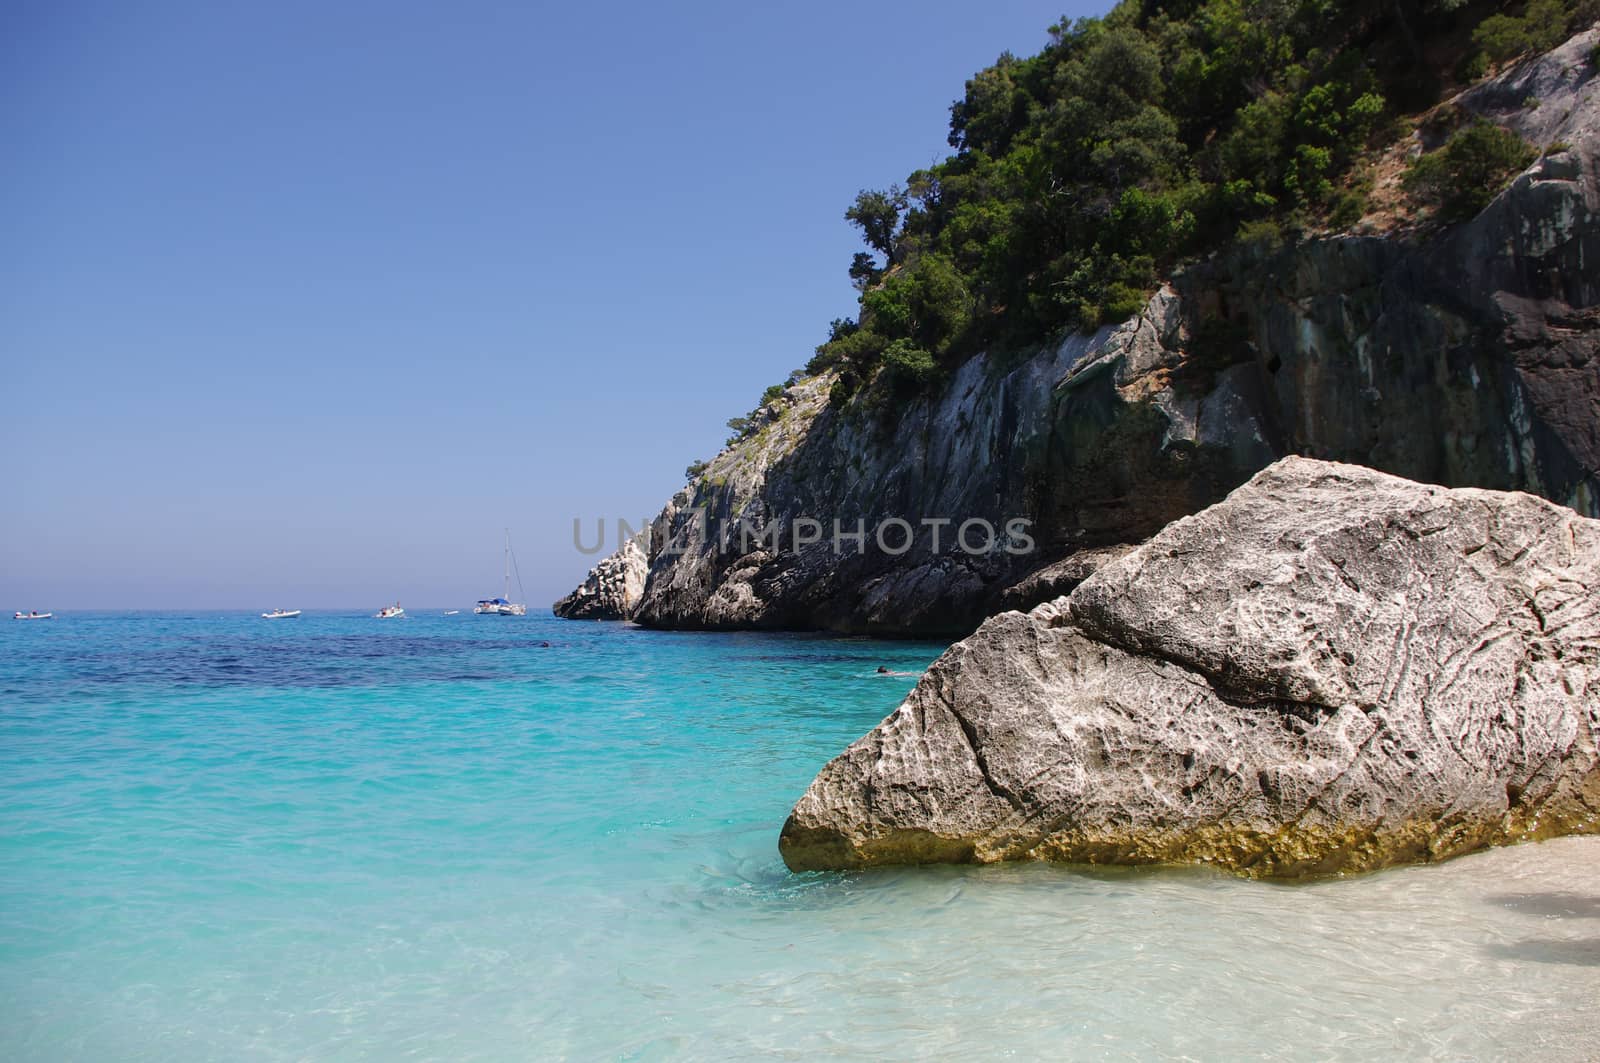 Beach "Cala Goloritze" in Sardinia. This beautiful bay is located on the eastern coast of Sardinia. It is accessible by boat or on foot via a path through the rugged mountains.